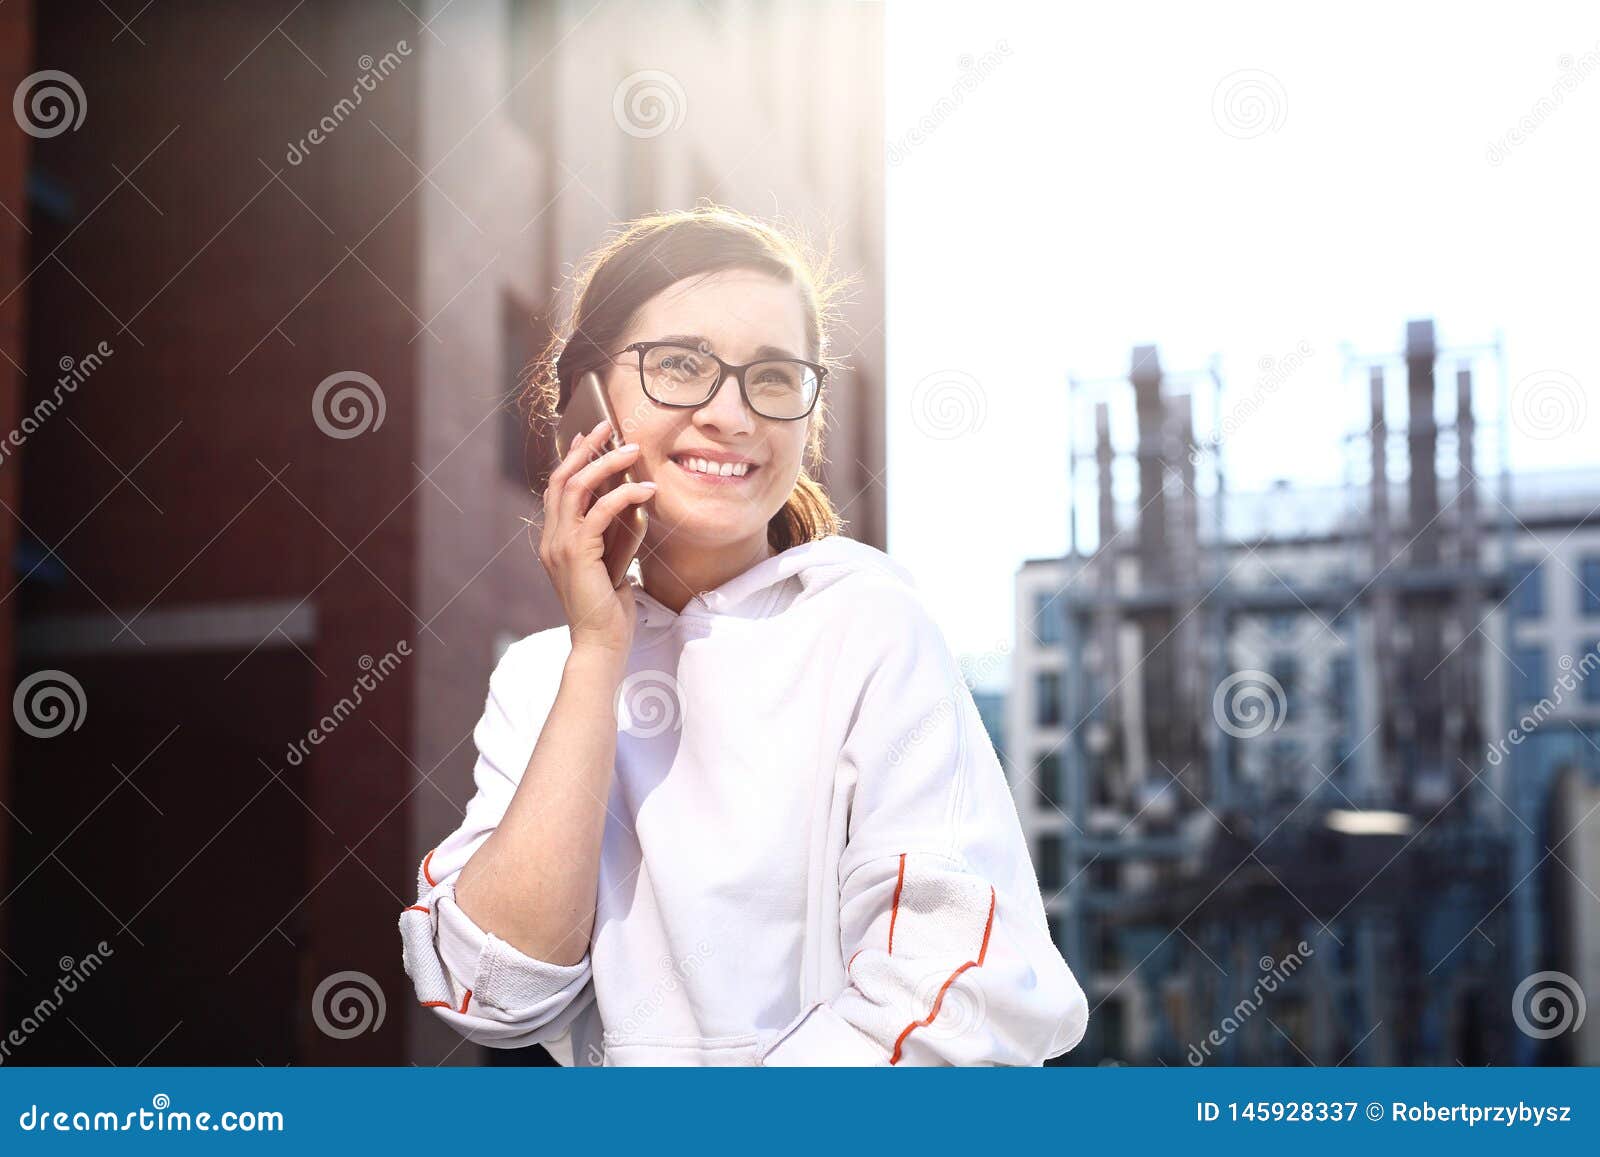 Happy, Smiling Young Woman Talking on the Phone Stock Image - Image of ...